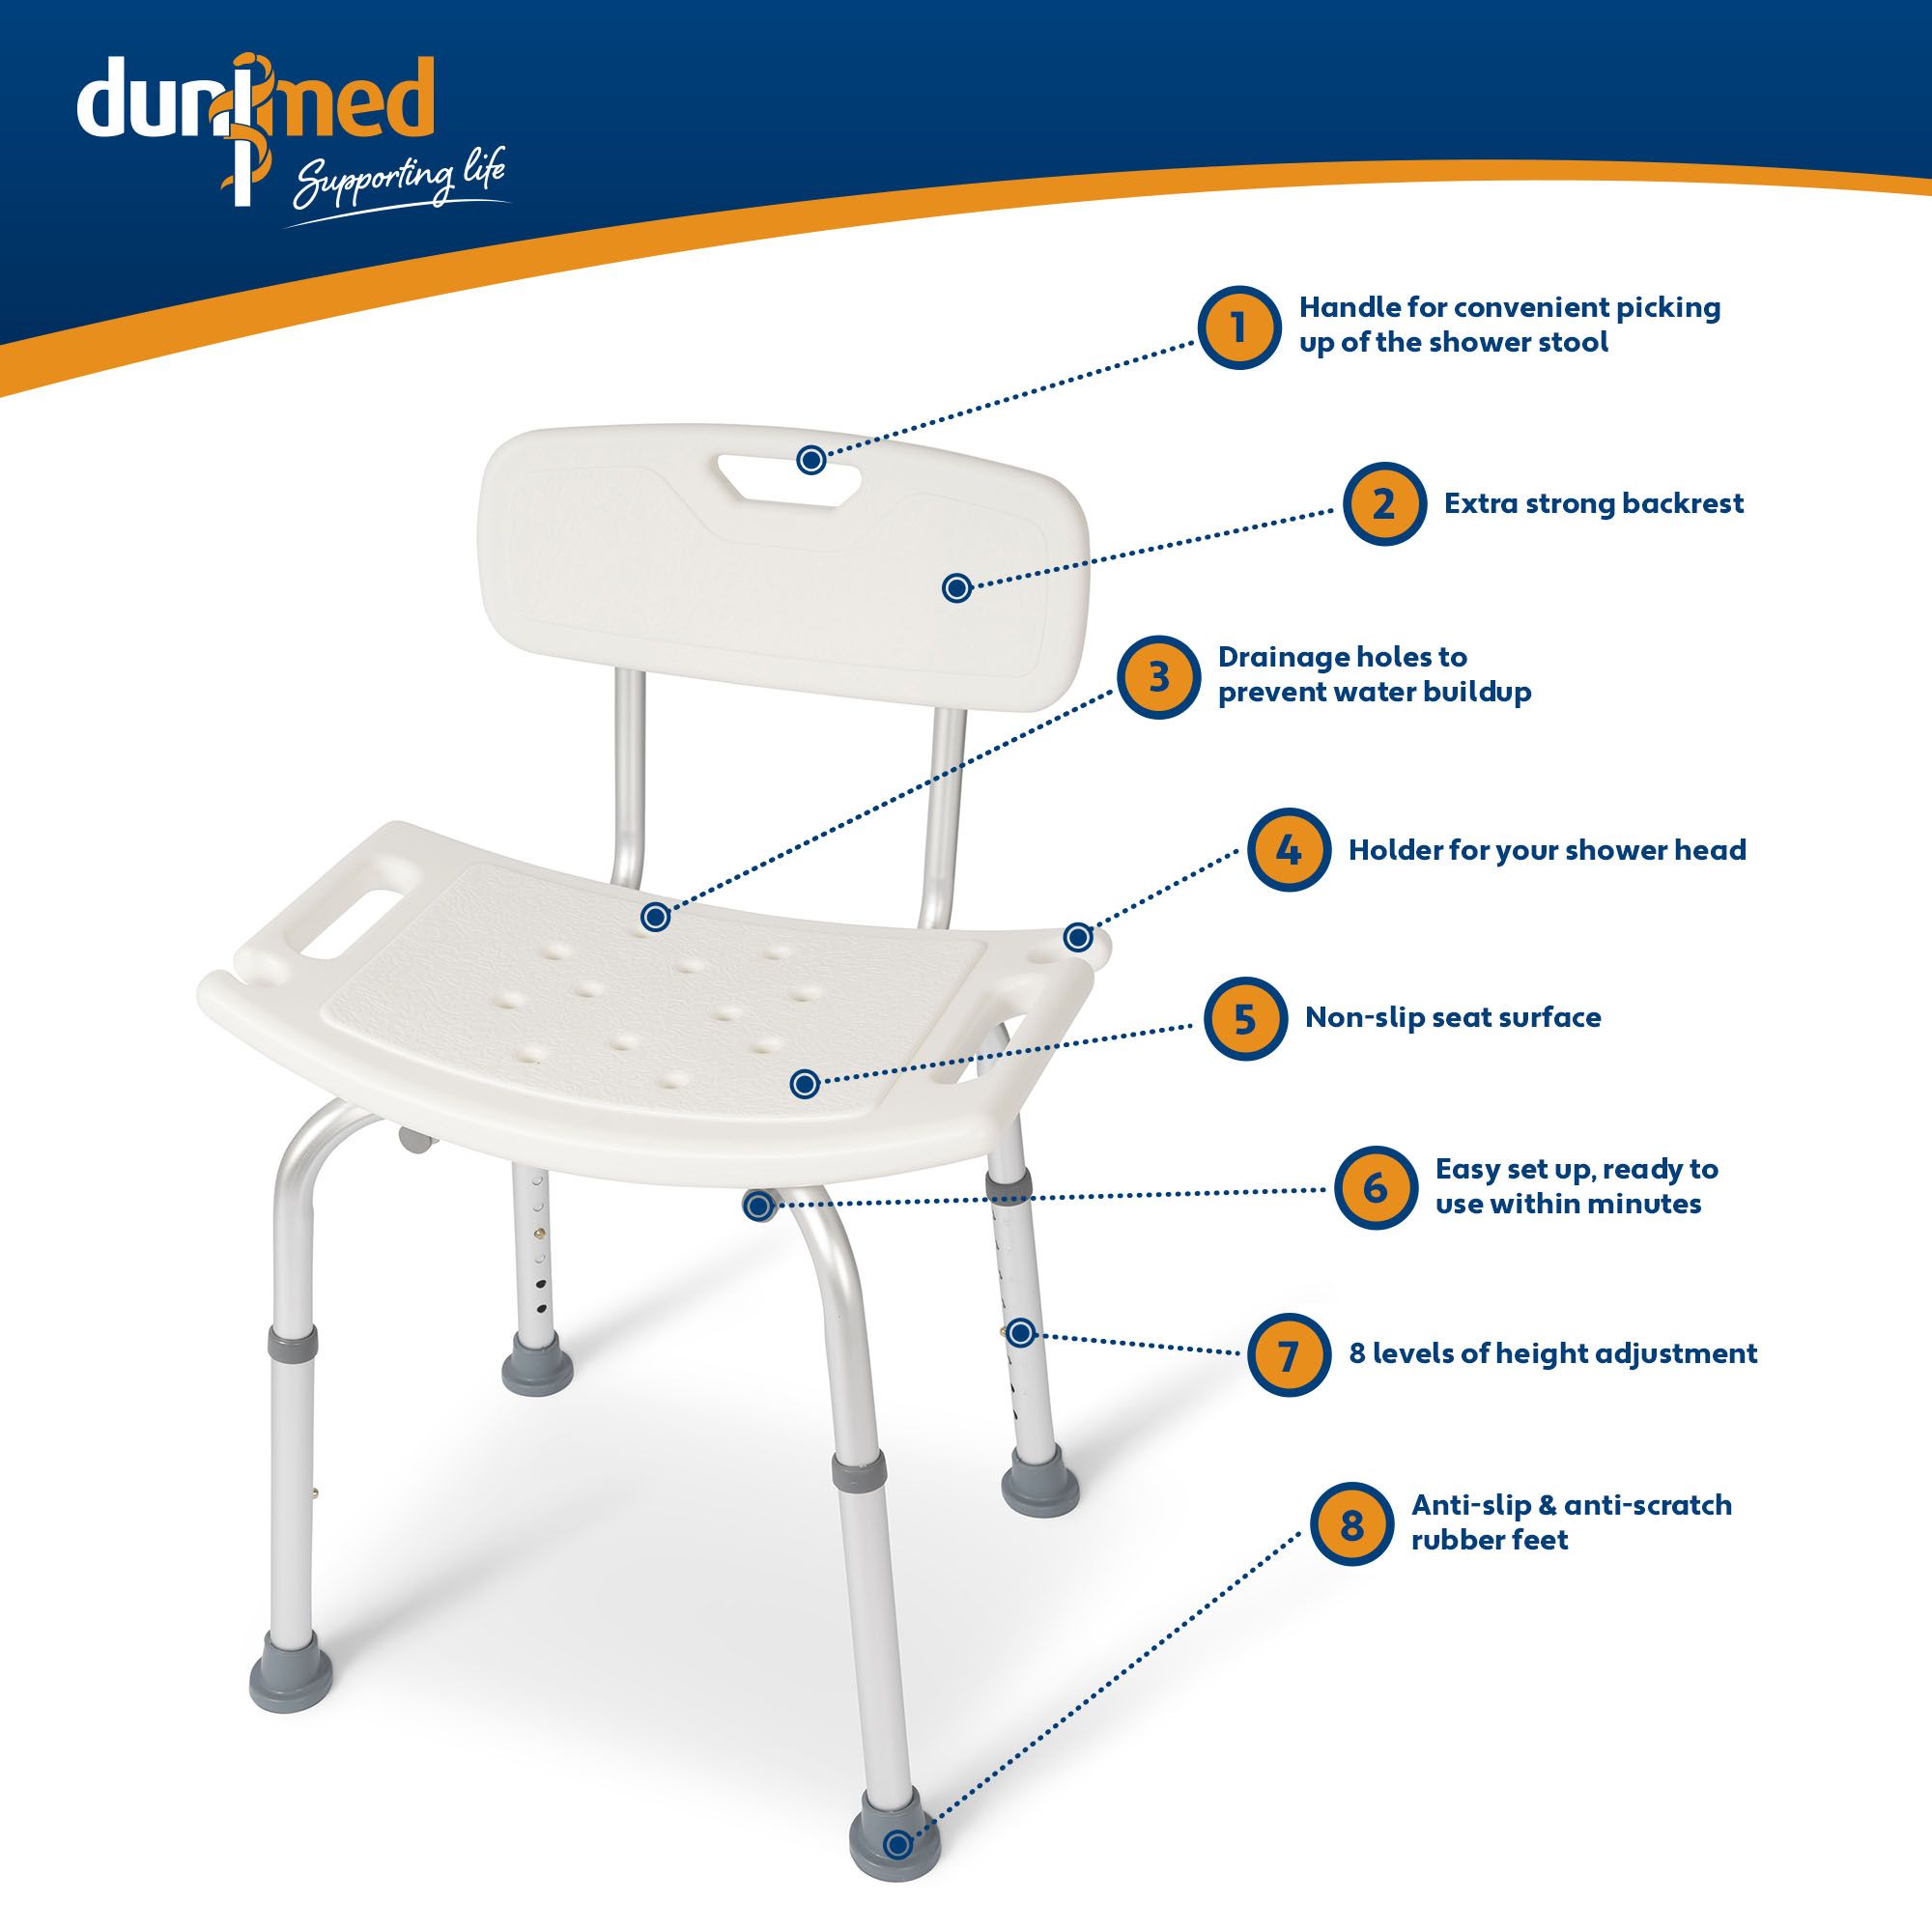 dunimed shower chair with backrest usp's